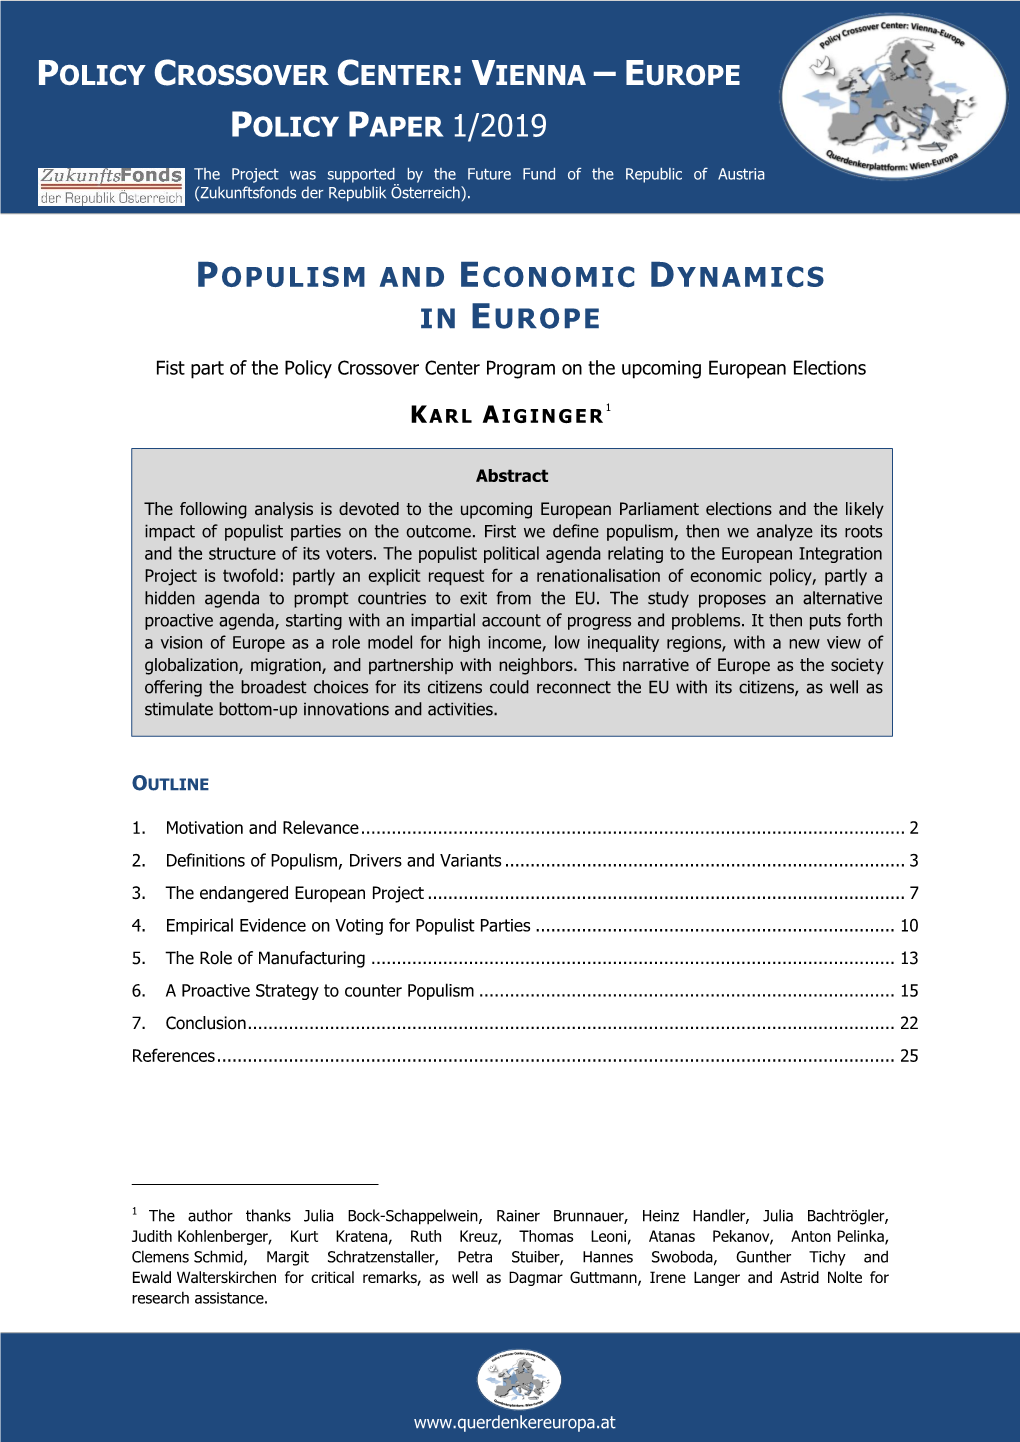 Populism and Economic Dynamics in Europe Policy